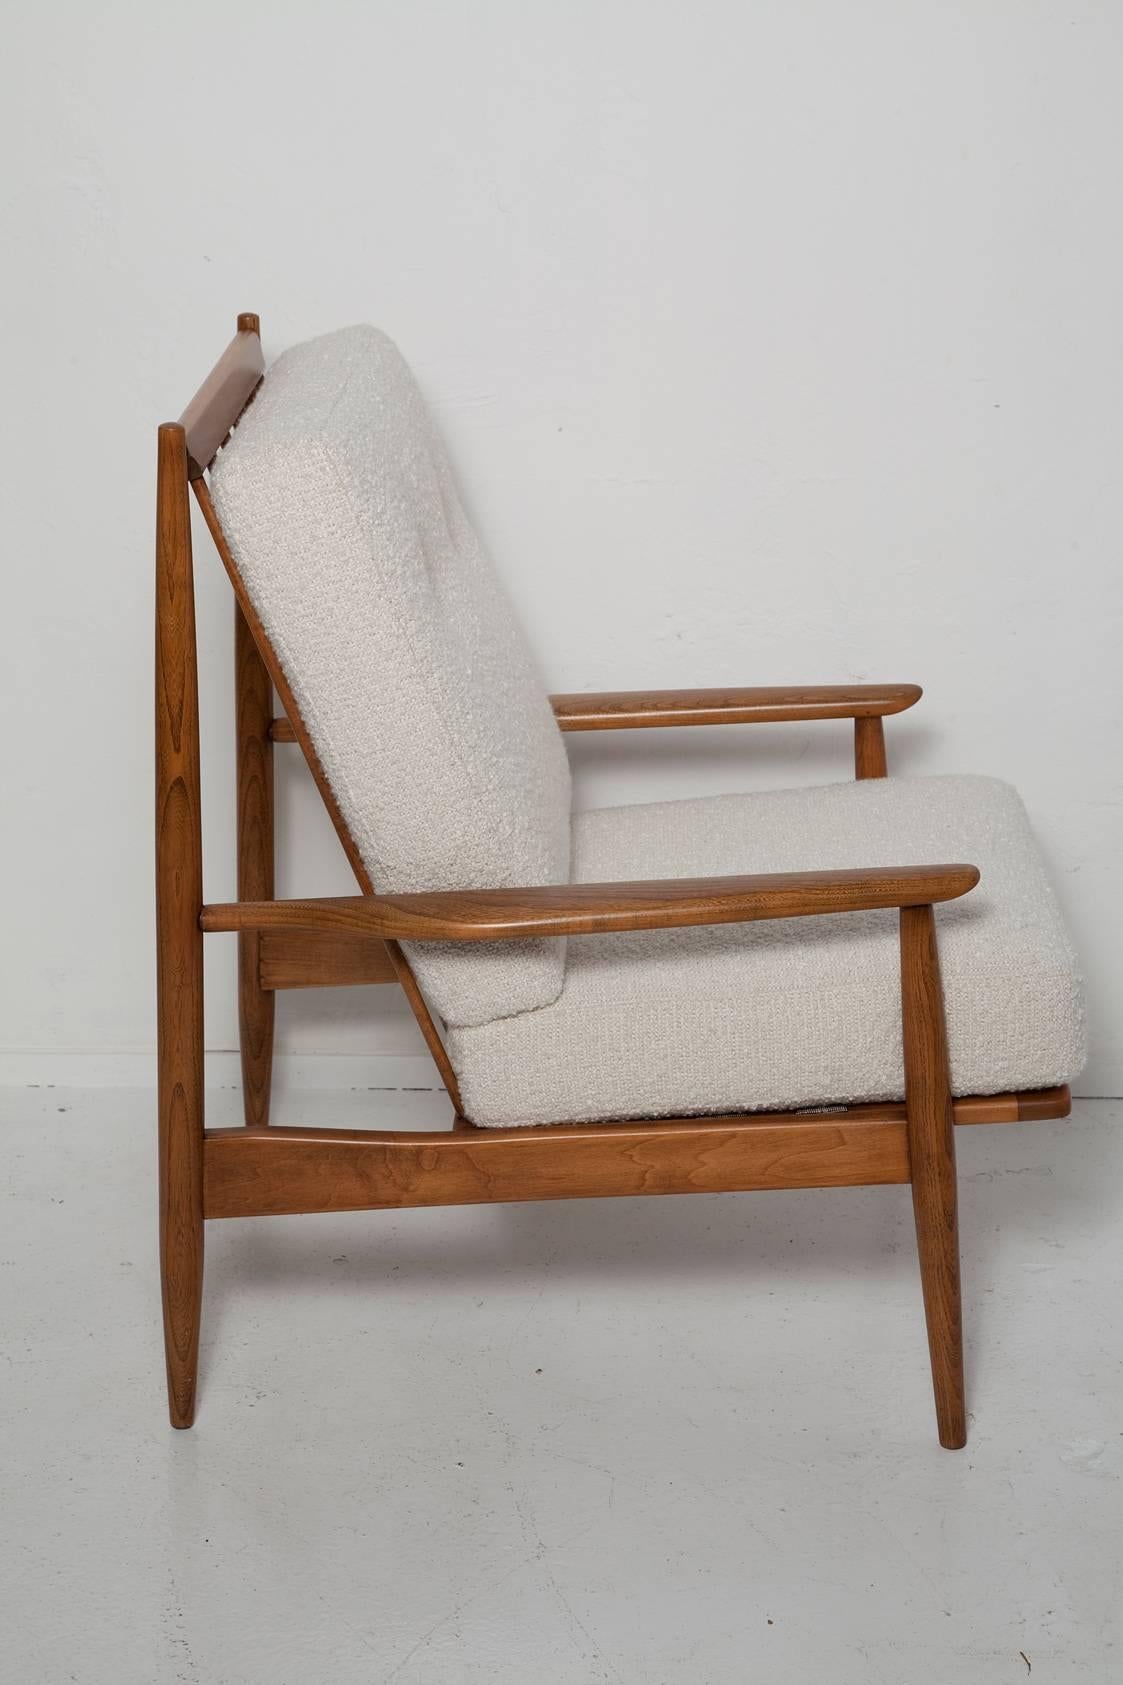 Beautifully restored 1950s Danish modern walnut lounge chair, with all new foam upholstered in a soft, rich, and woolly Beacon Hill Angora bouclé.